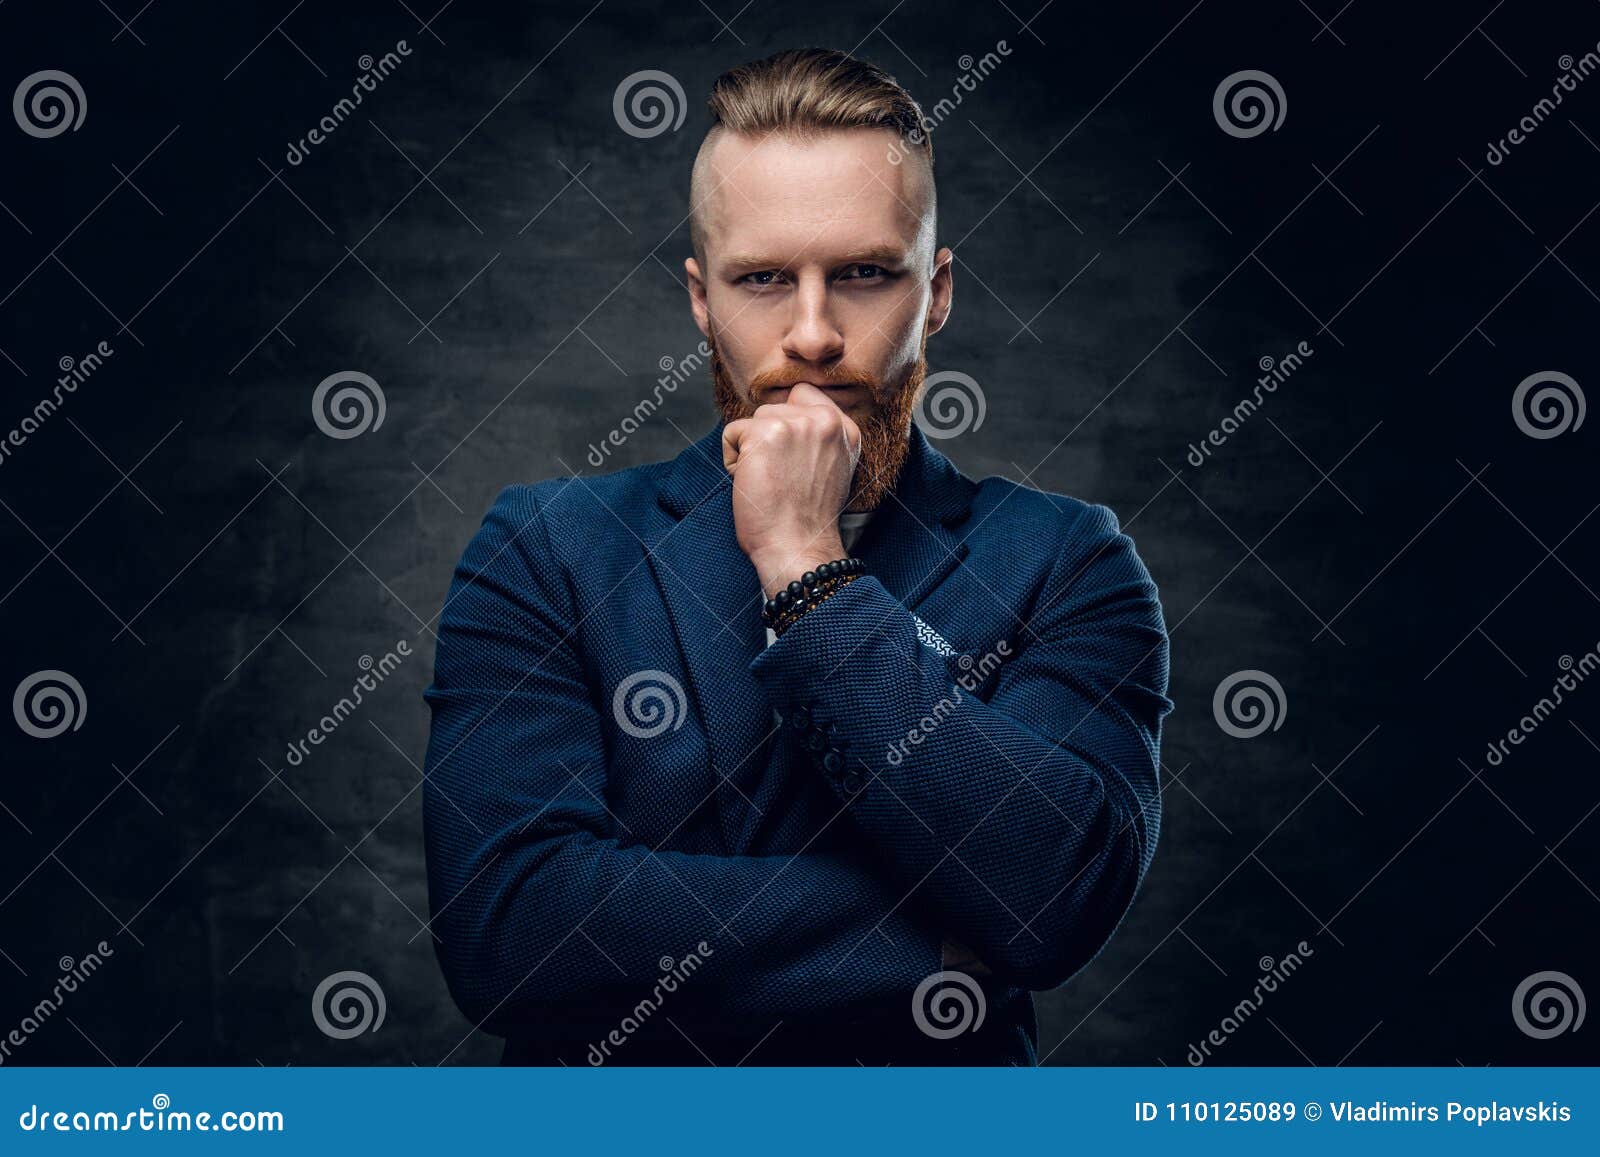 Redhead Hipster Male Dressed in a Blue Jacket. Stock Image - Image of ...